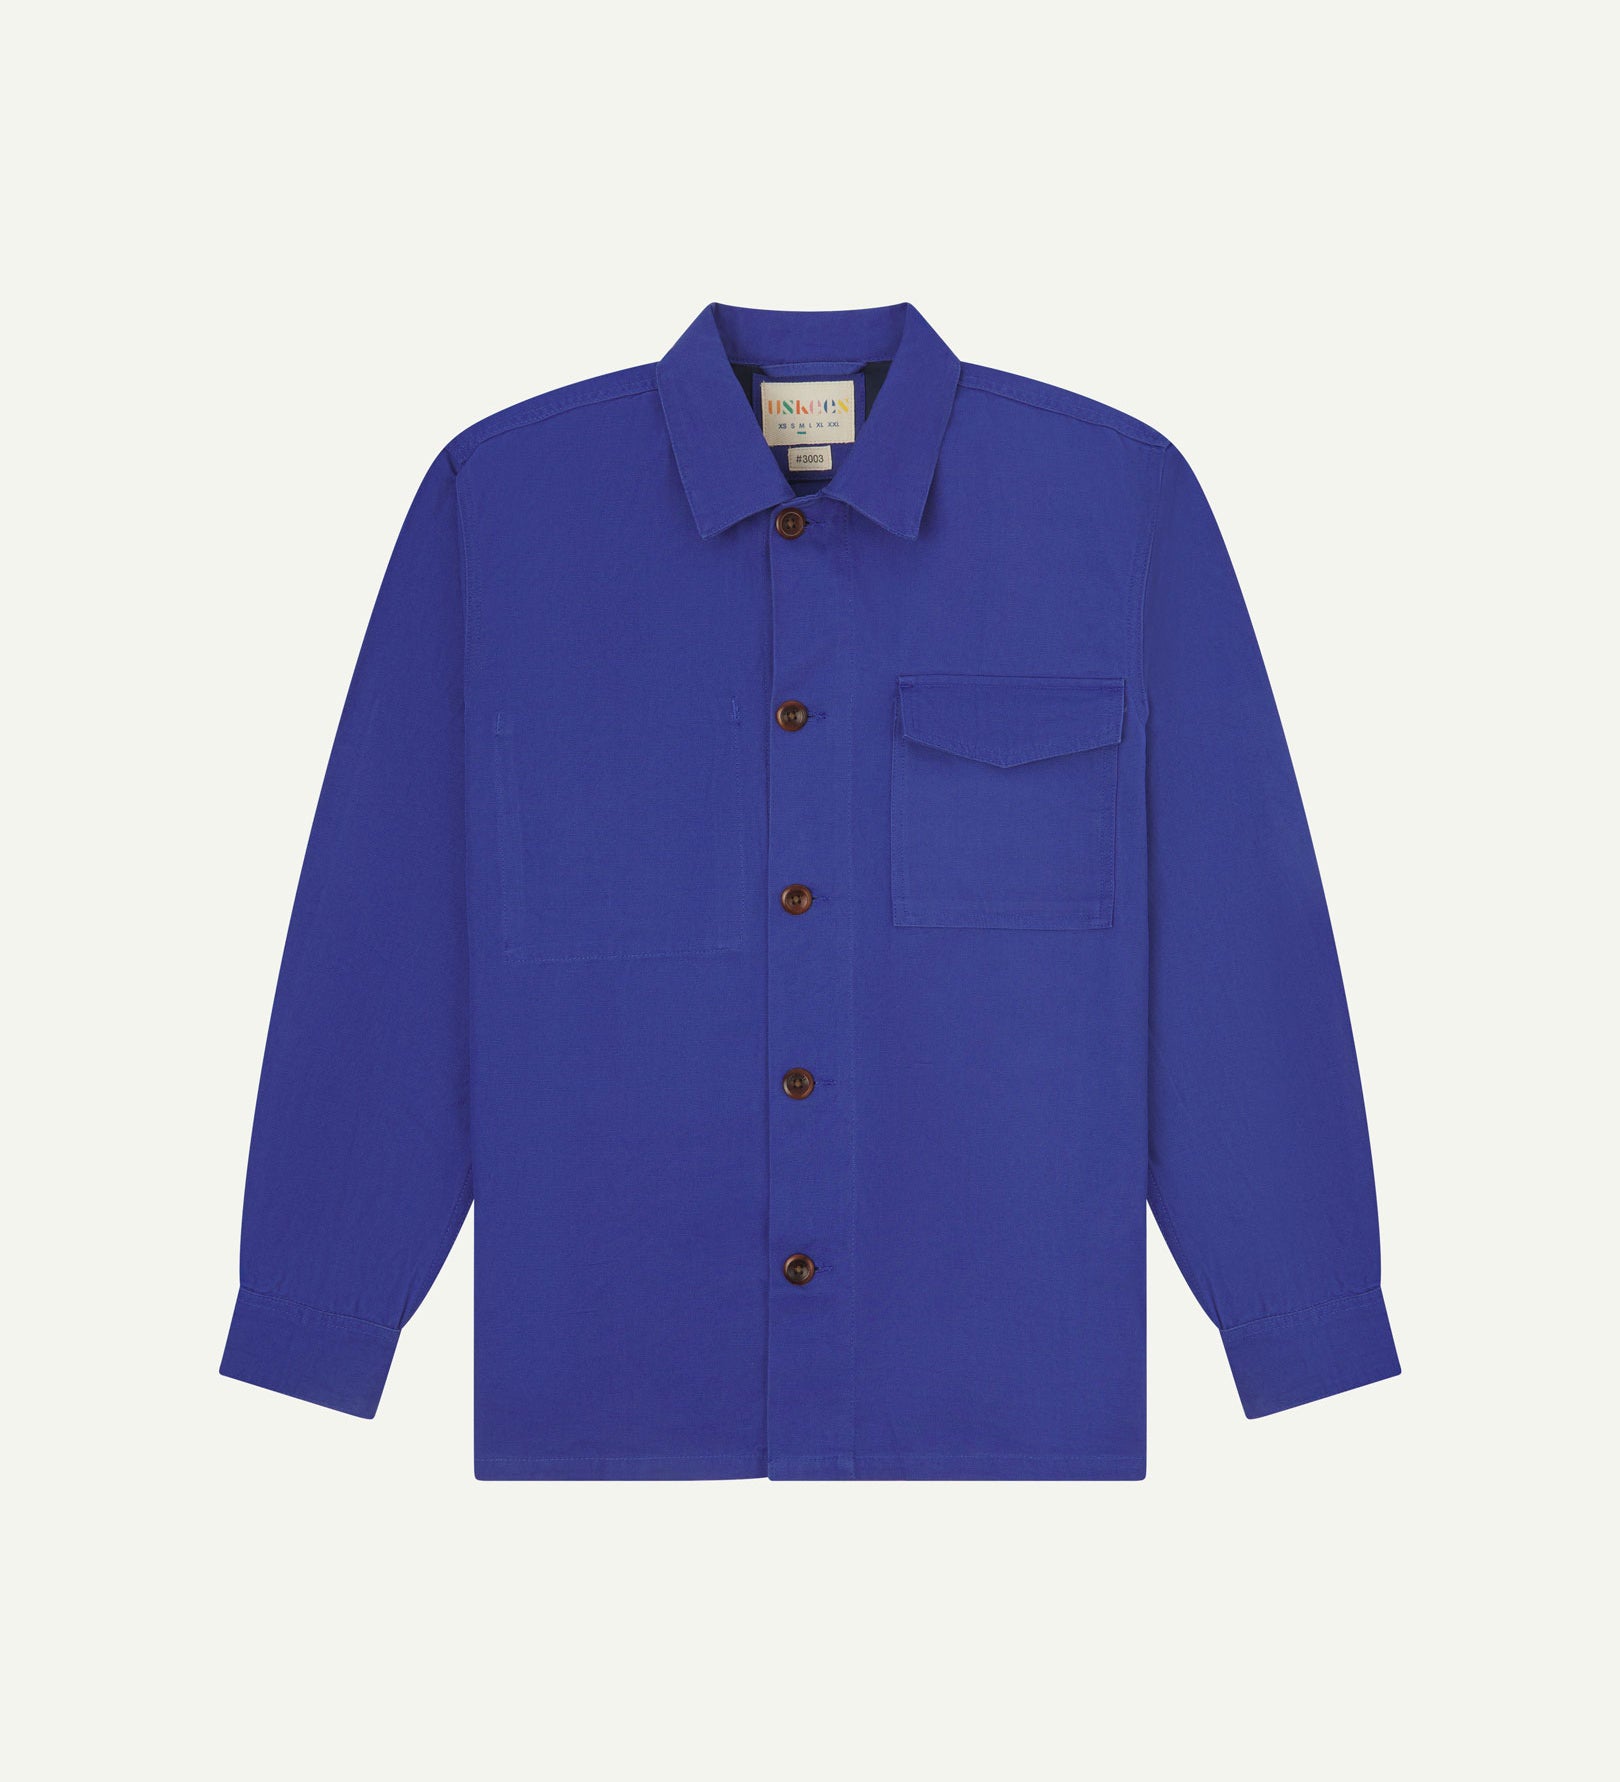 Ultra blue buttoned organic cotton workshirt from Uskees with clear view of chest pocket and Uskees branding label.